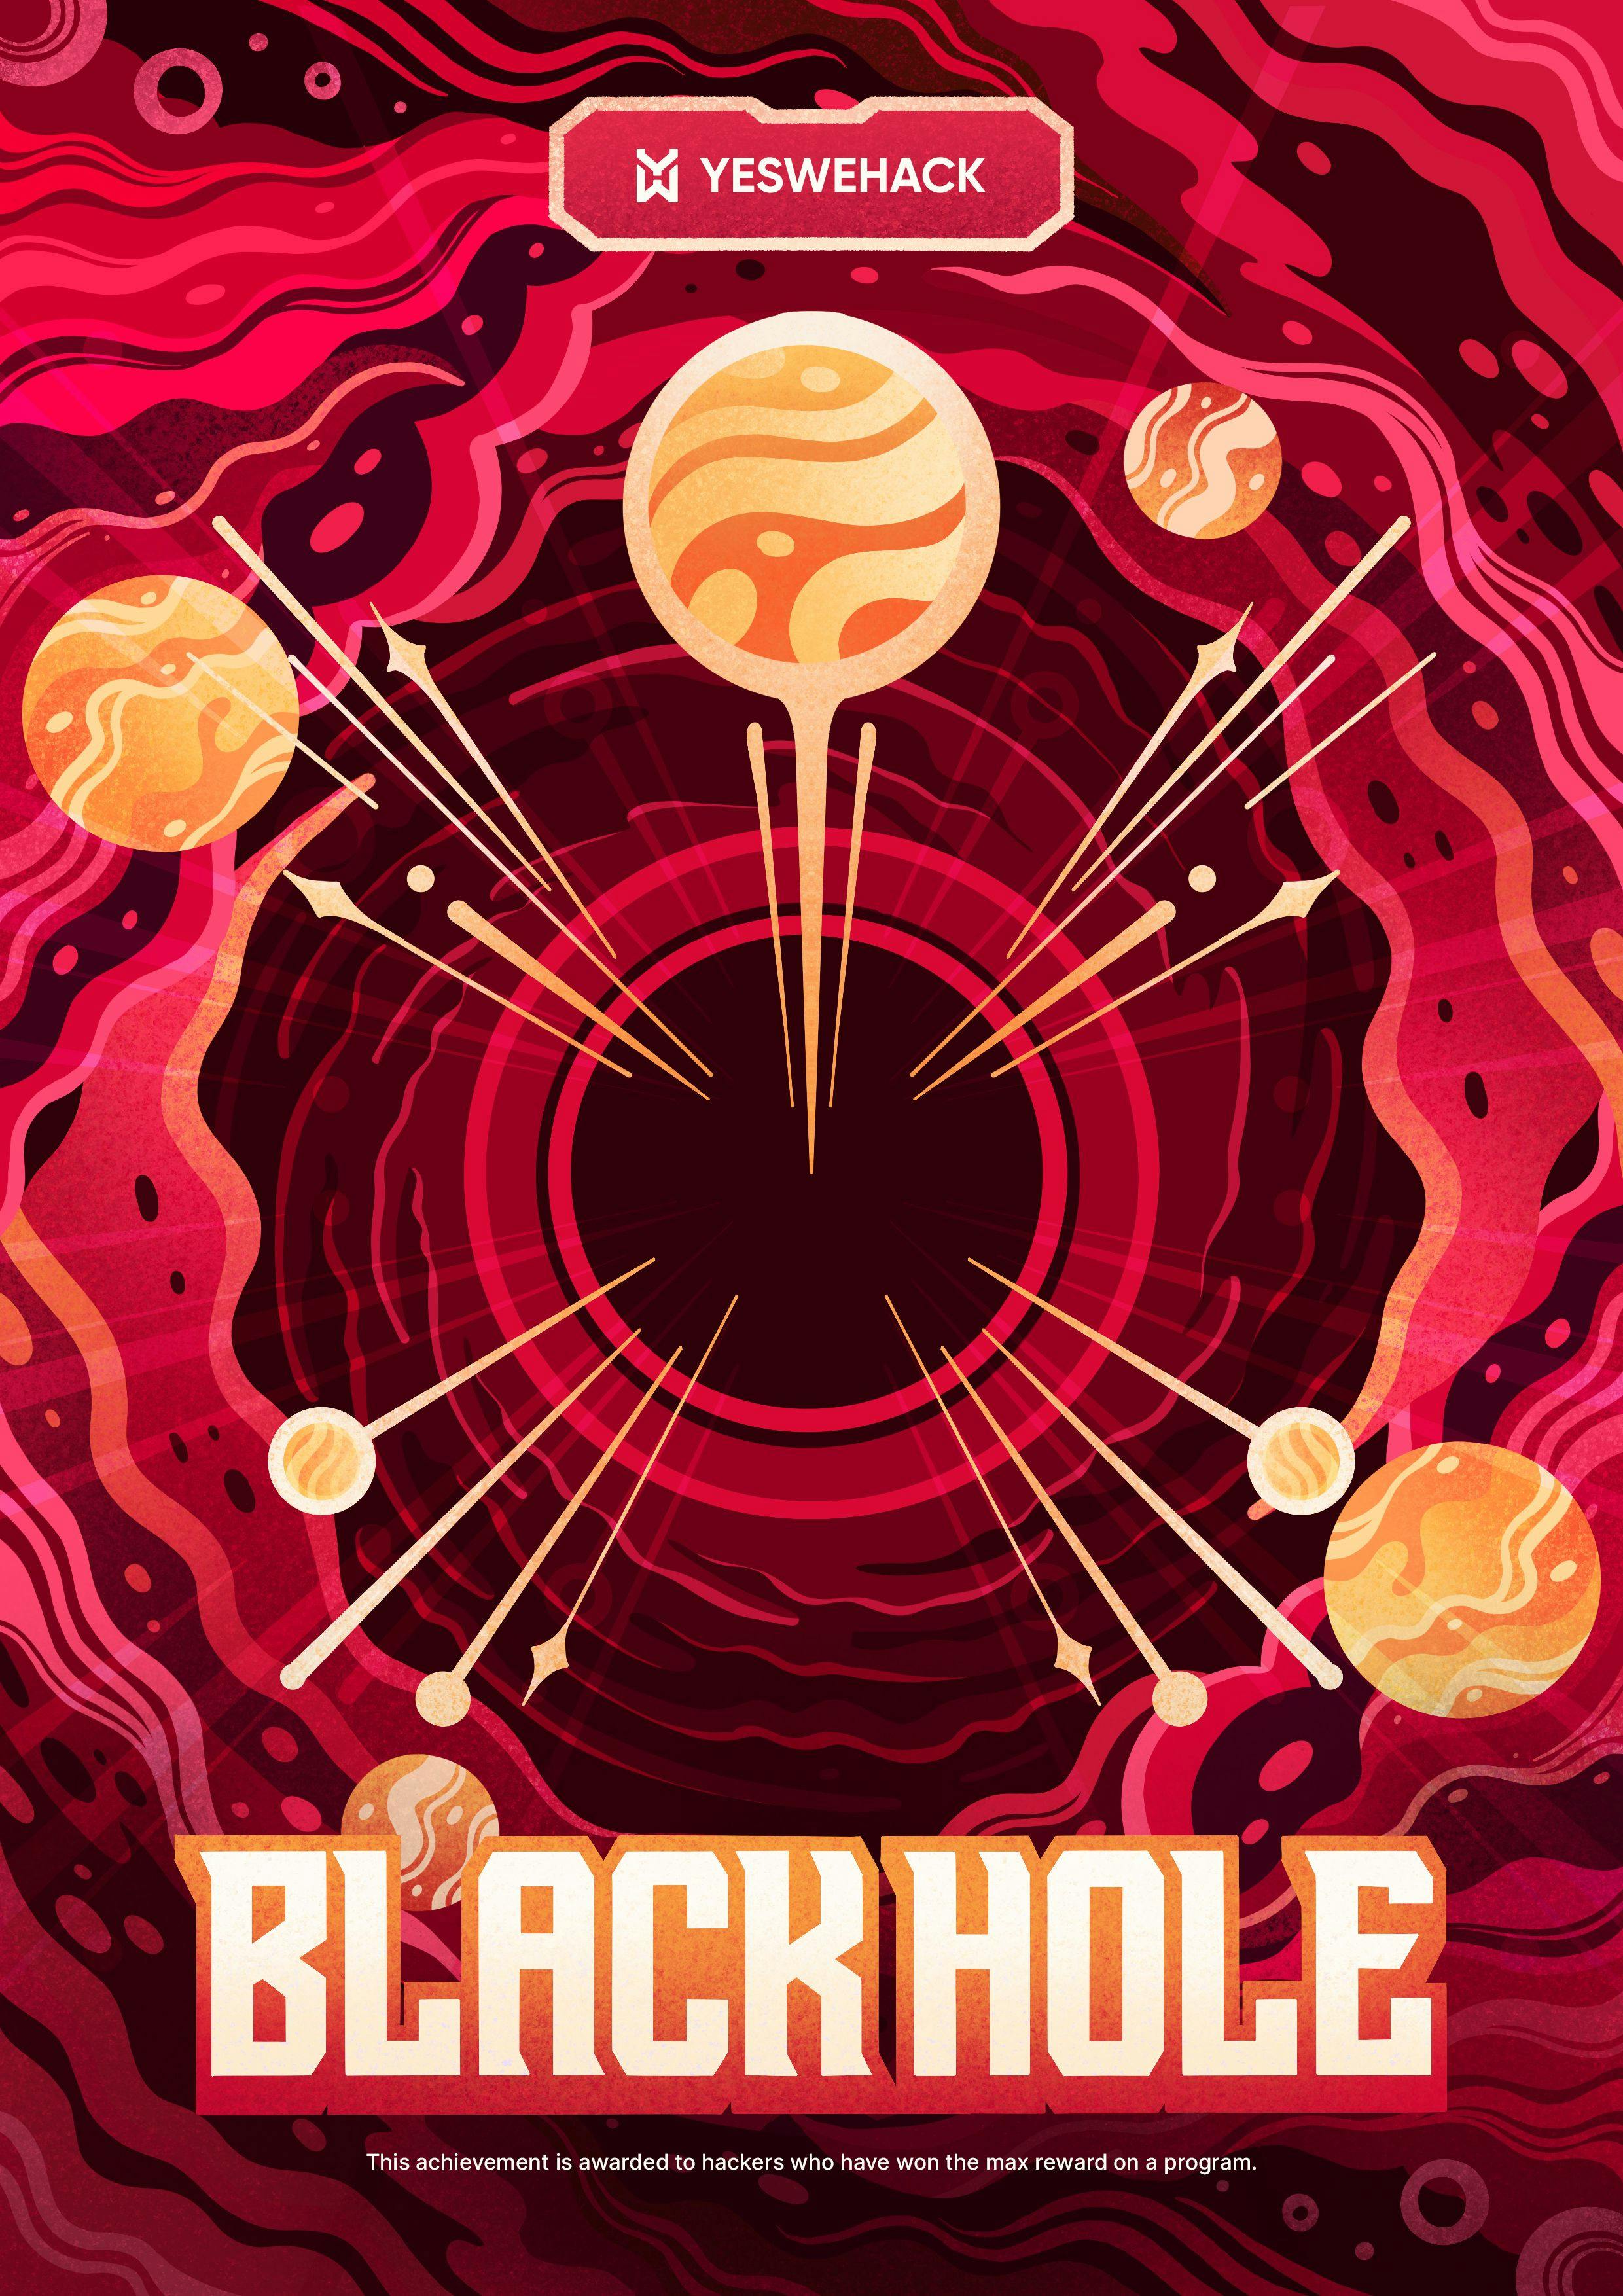 YesWeHack hunter achievements: BLACK HOLE poster for ethical hackers who win maximum bug bounties